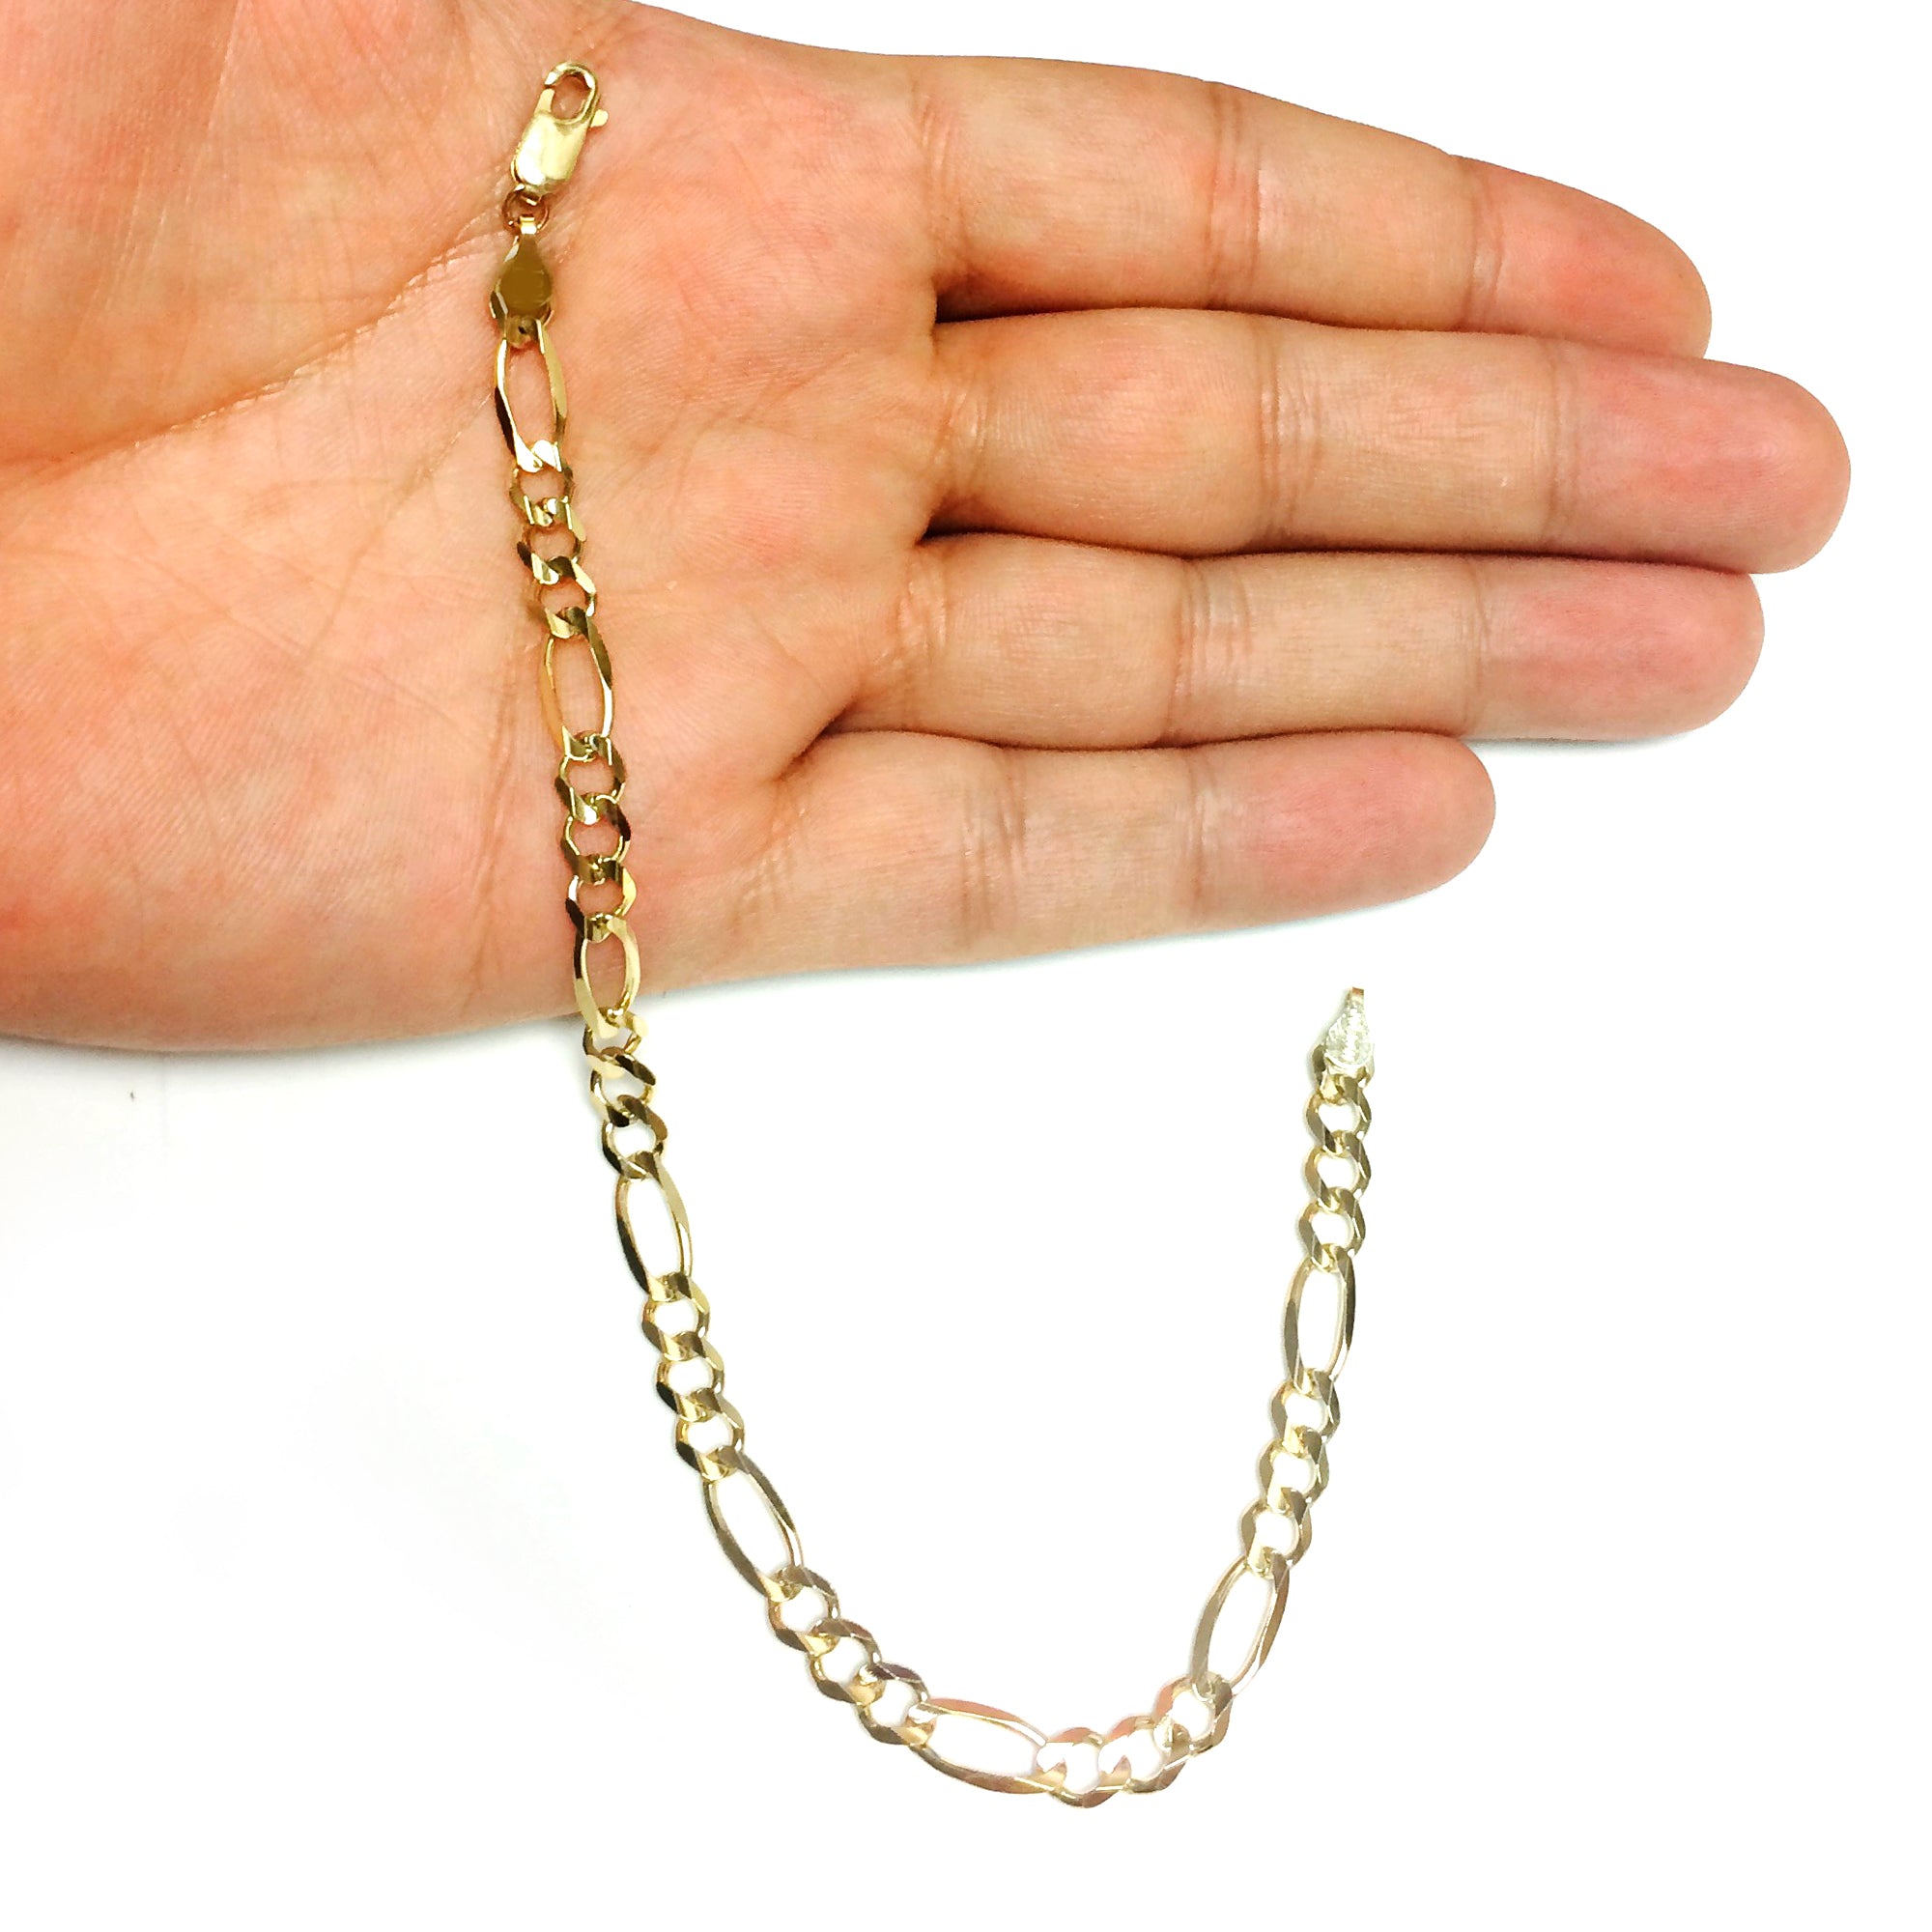 10k Yellow Solid Gold Figaro Chain Bracelet, 5.0mm, 8.5"